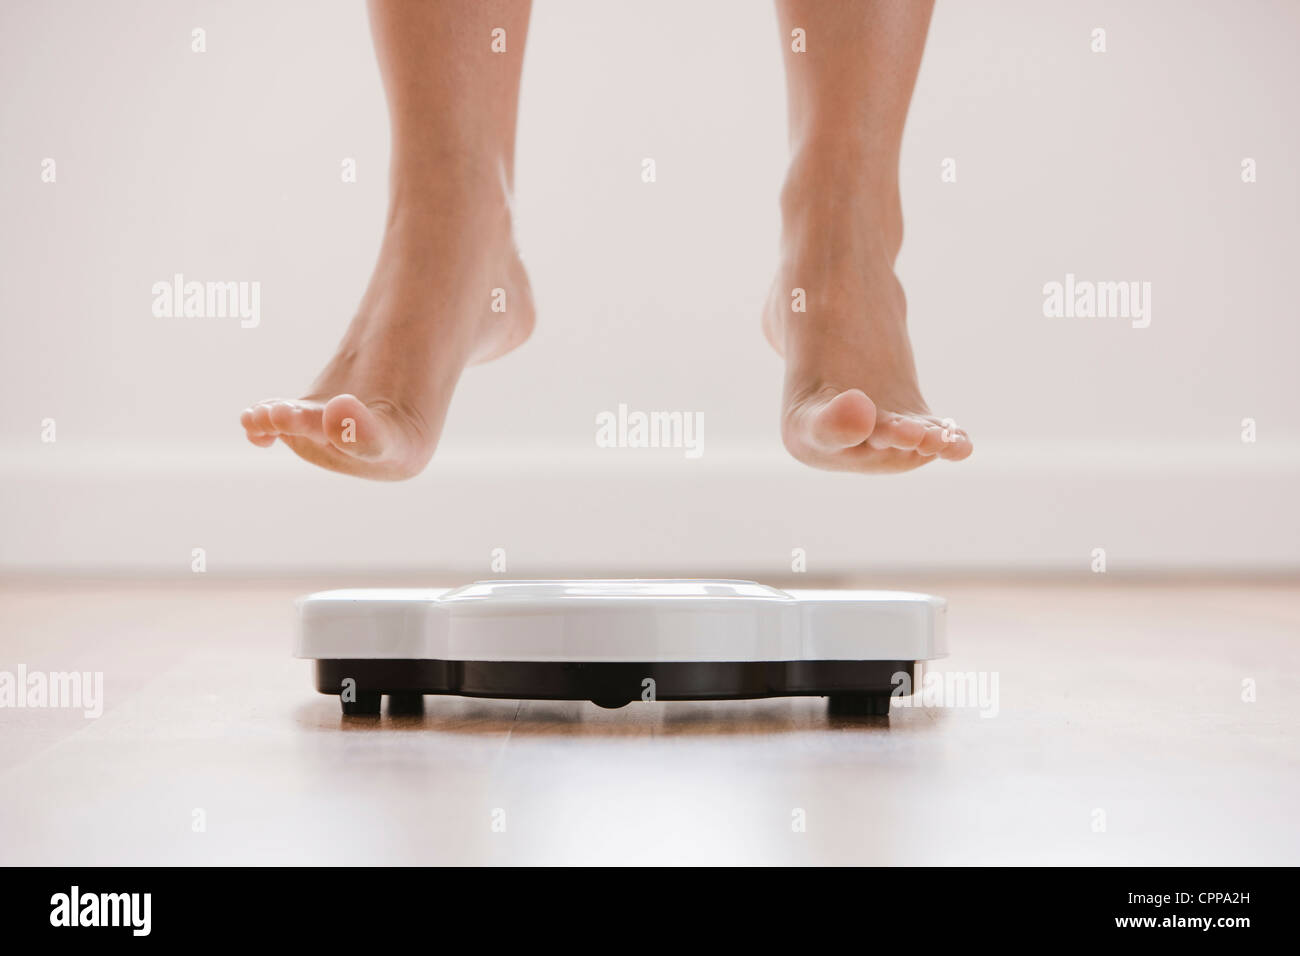 Caucasian woman's feet jumping on scale Stock Photo